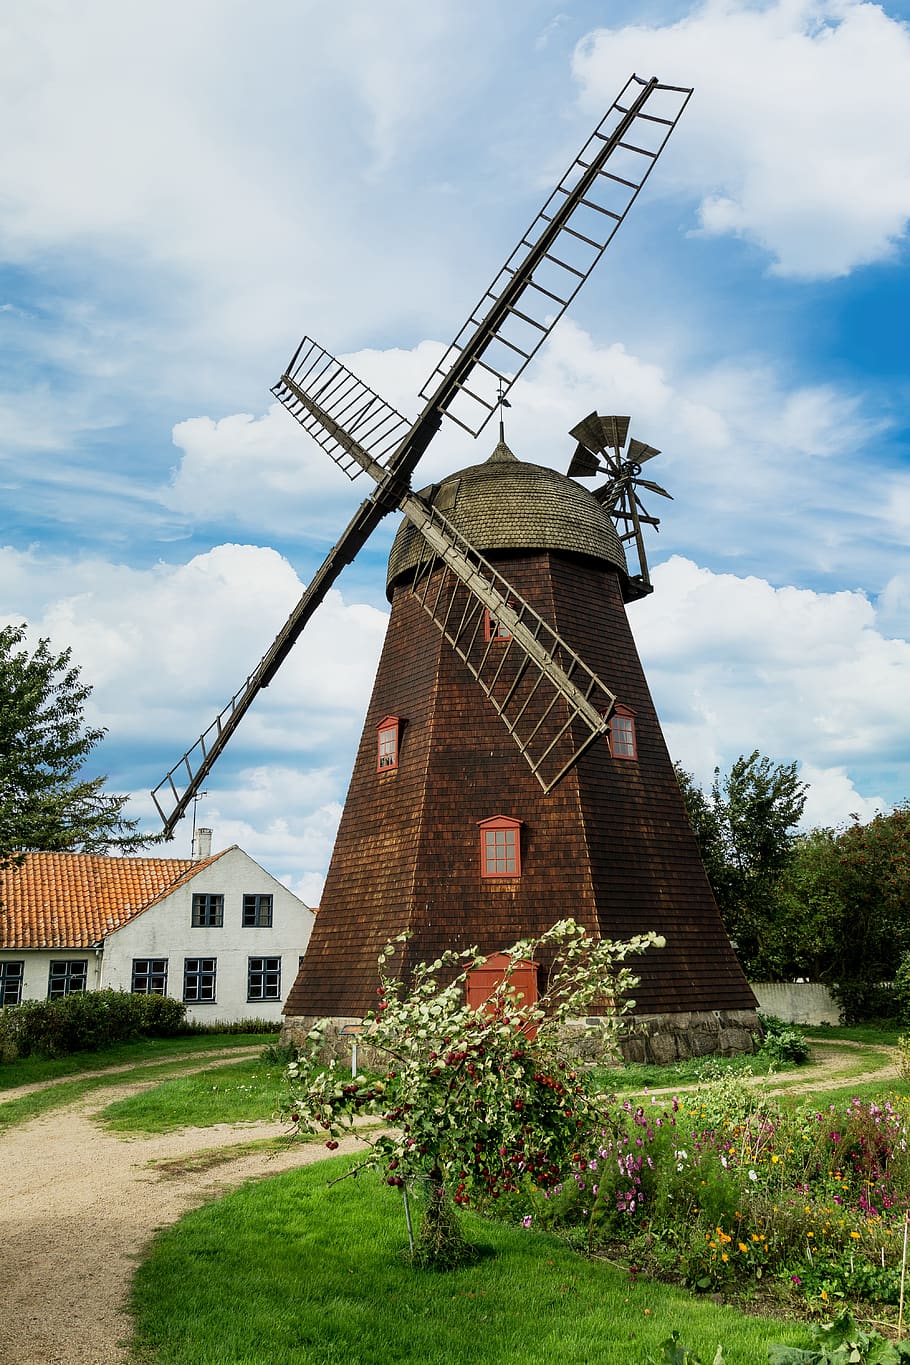 windmill, clouds, house, garden, trees, tower windmill, old, building, architecture, wood